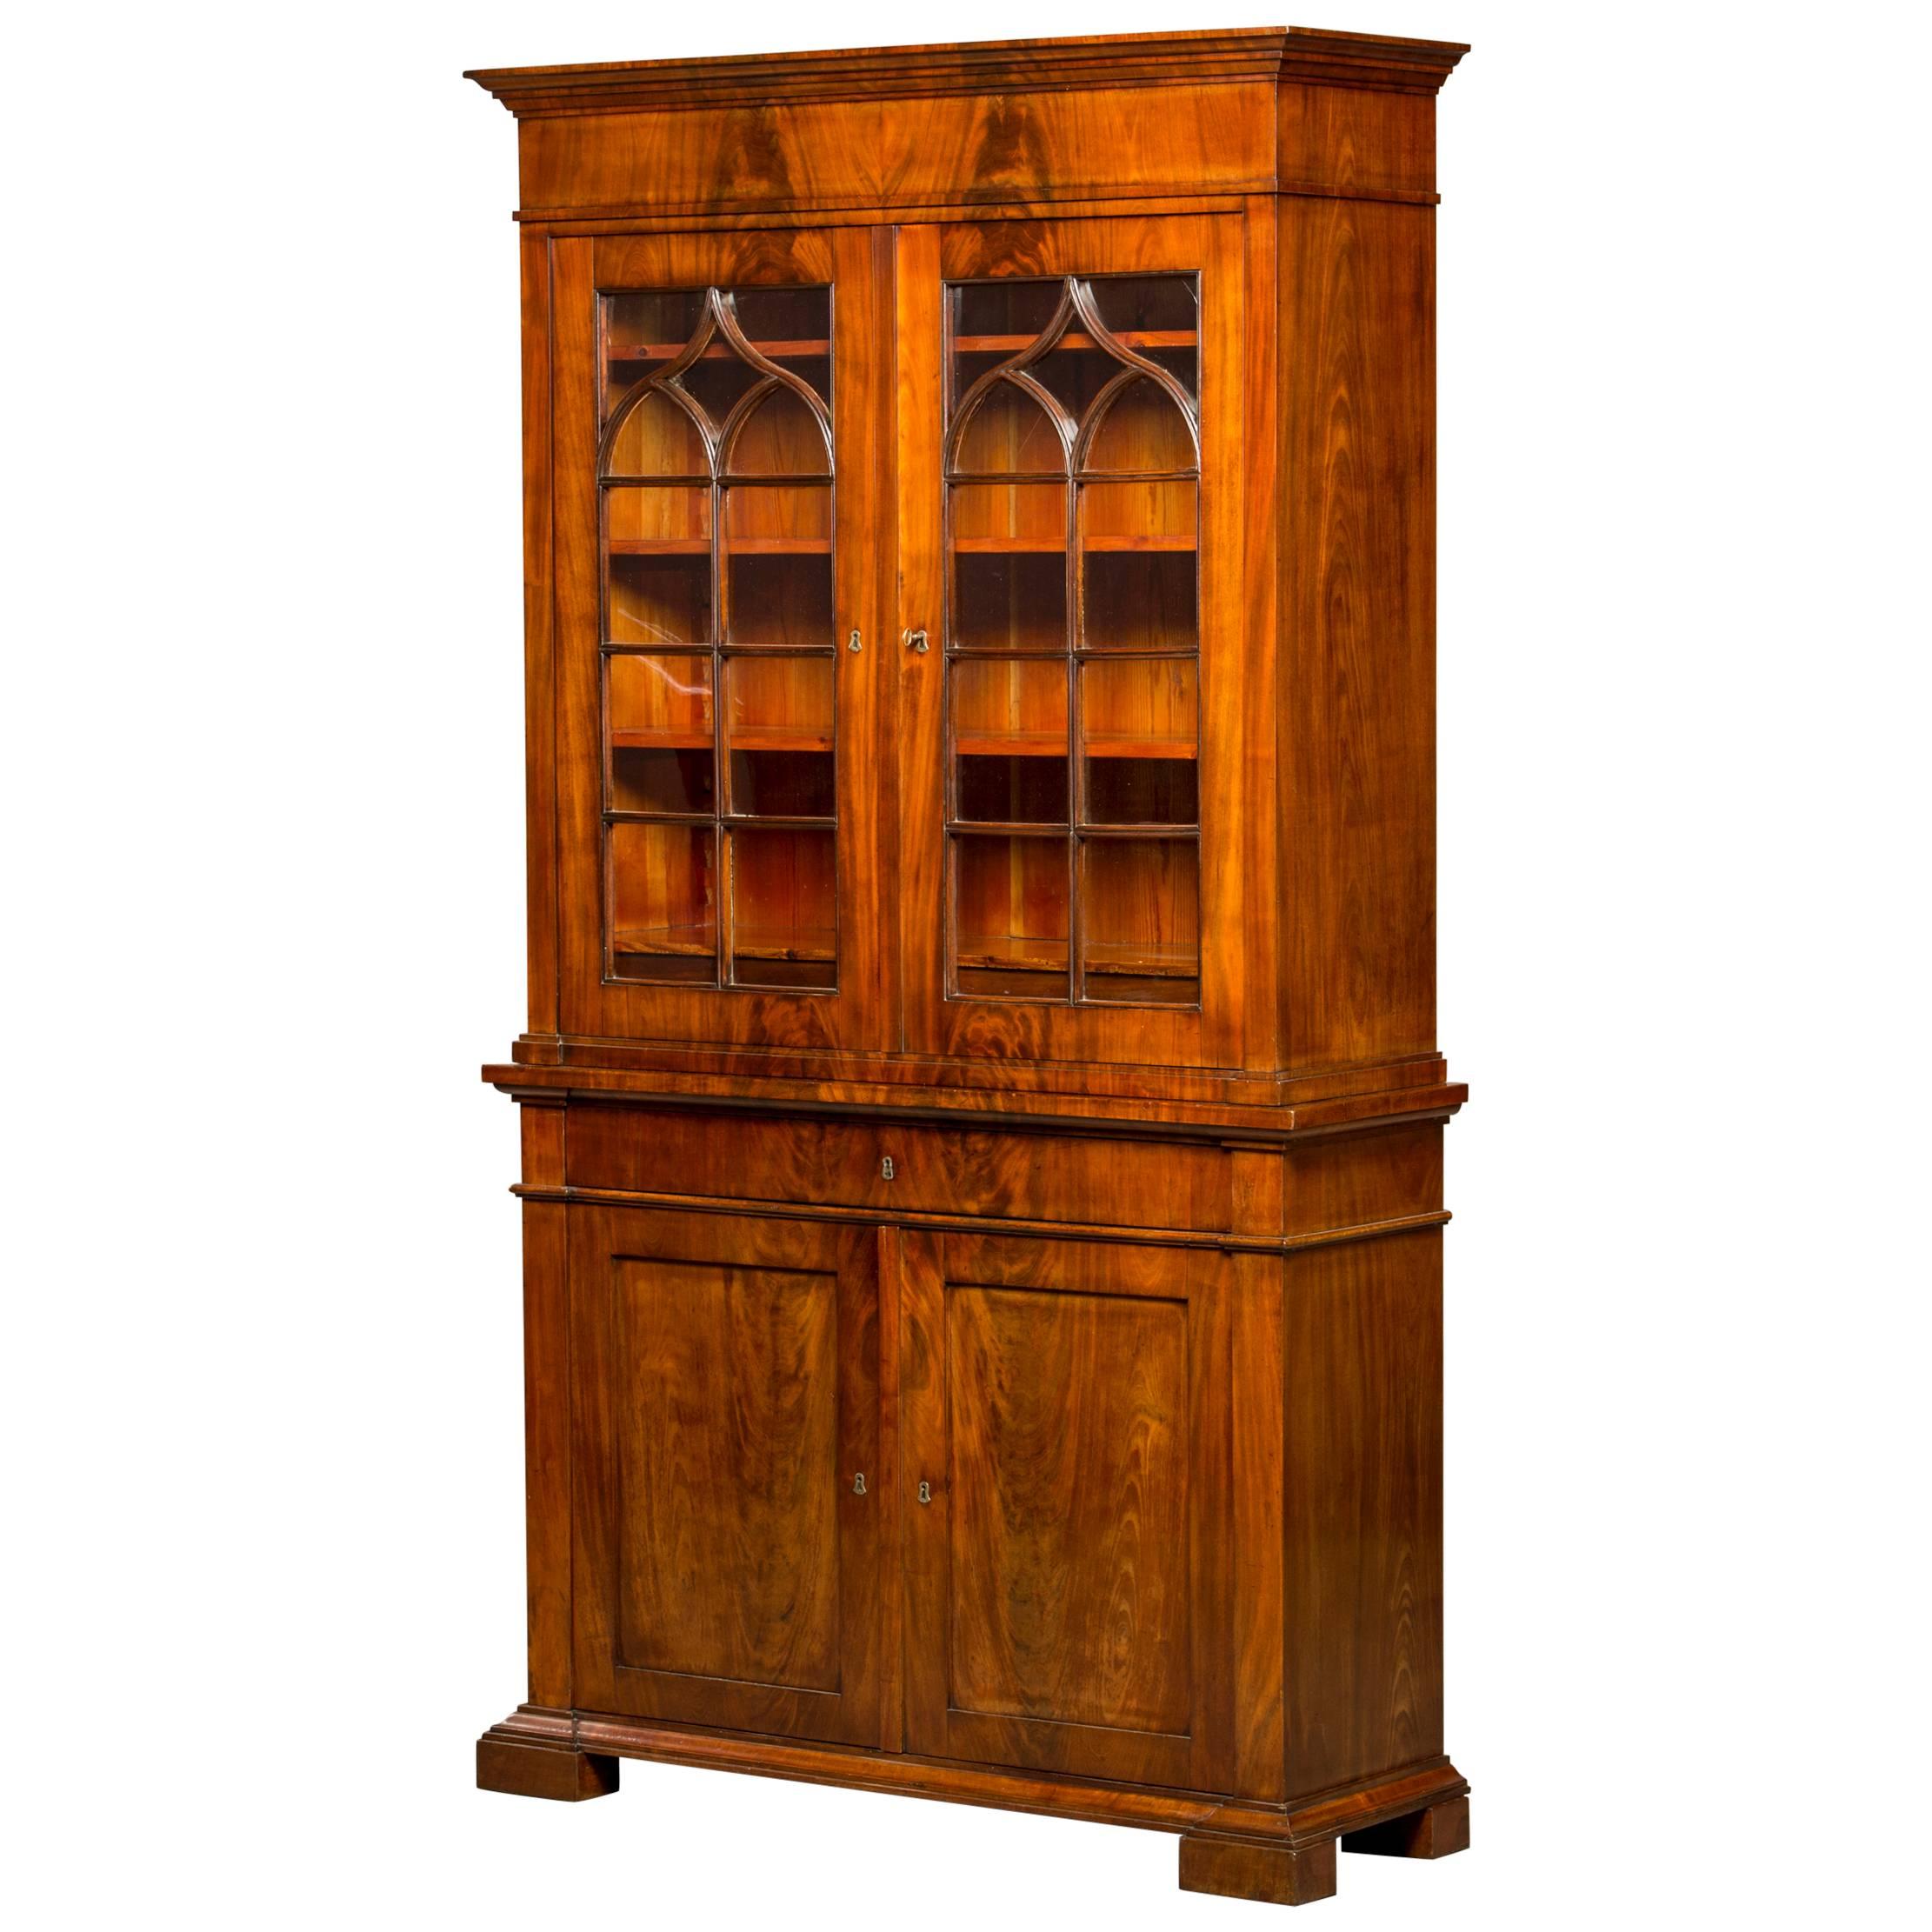 Late Empire Bookcase in Neo-Gothic Style Made of Cuban Mahogany